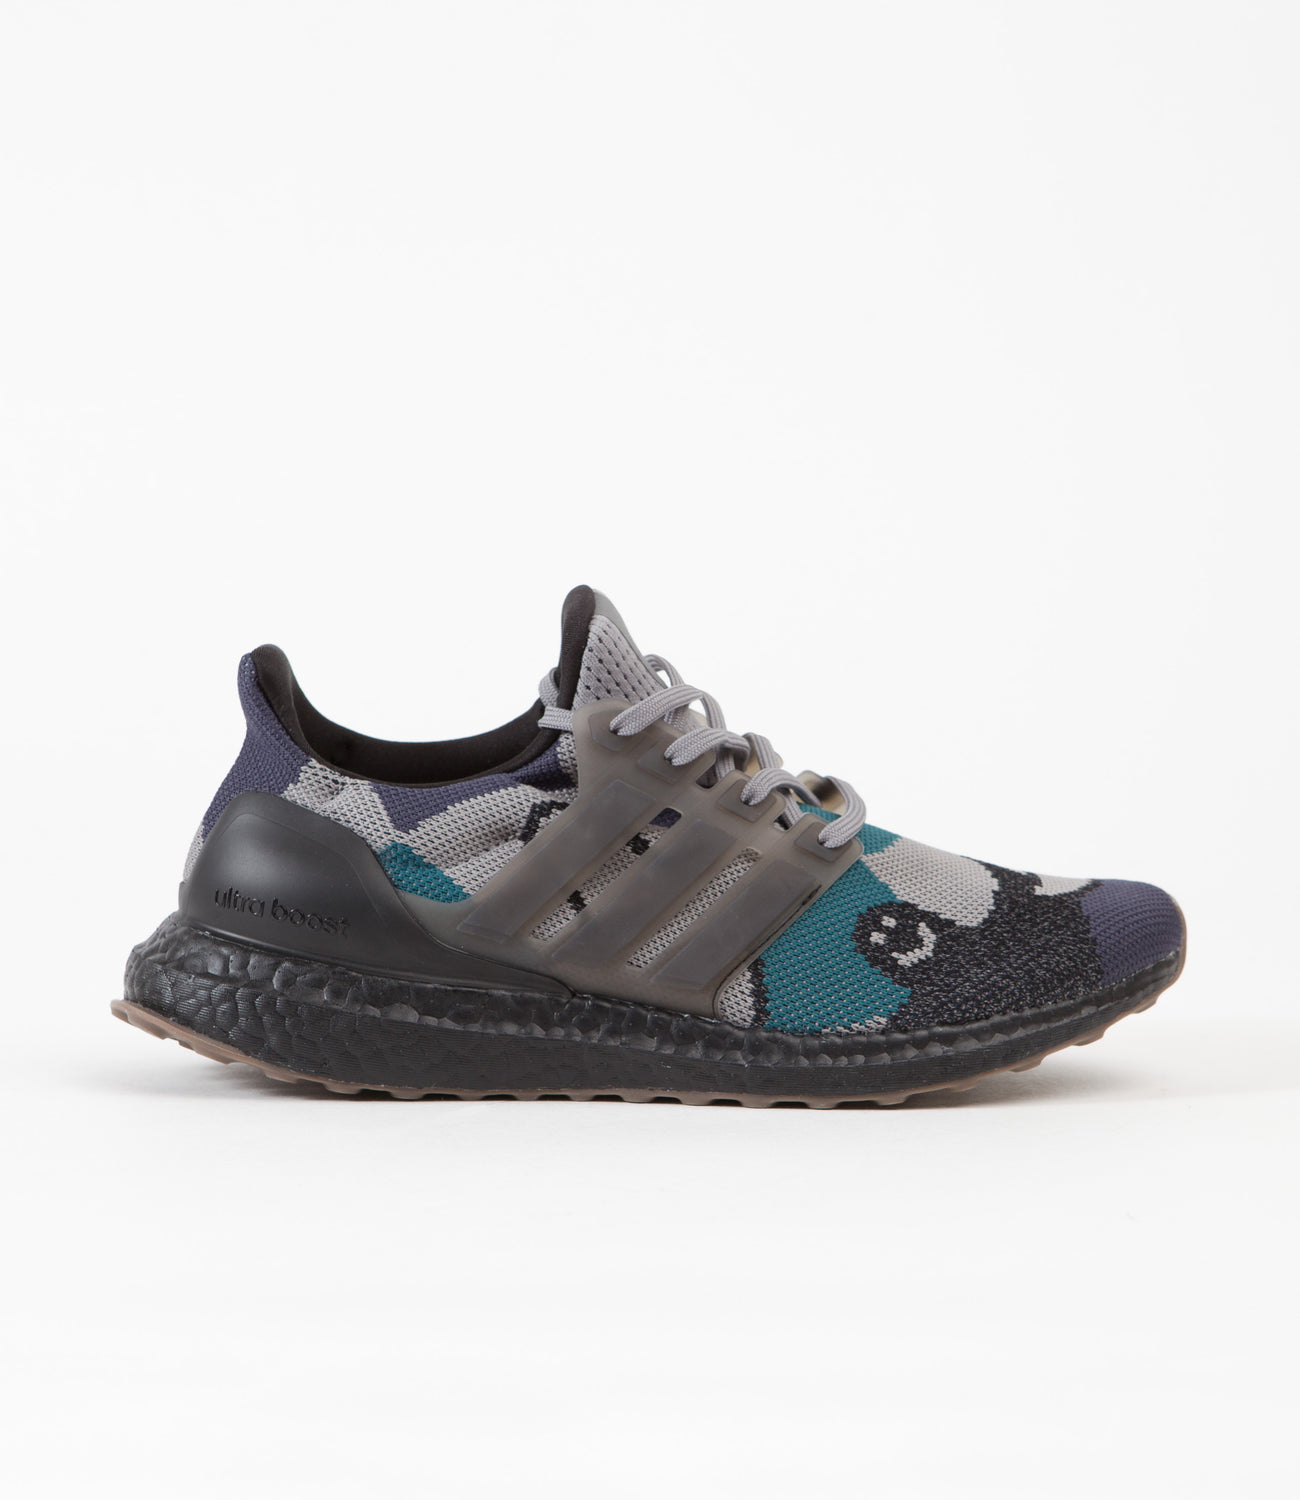 BillrichardsonShops - como conseguir adidas countries glitch minecraft | Adidas countries Gonz Ultra Boost Shoes - adidas countries eyewear a692 price chart philippines